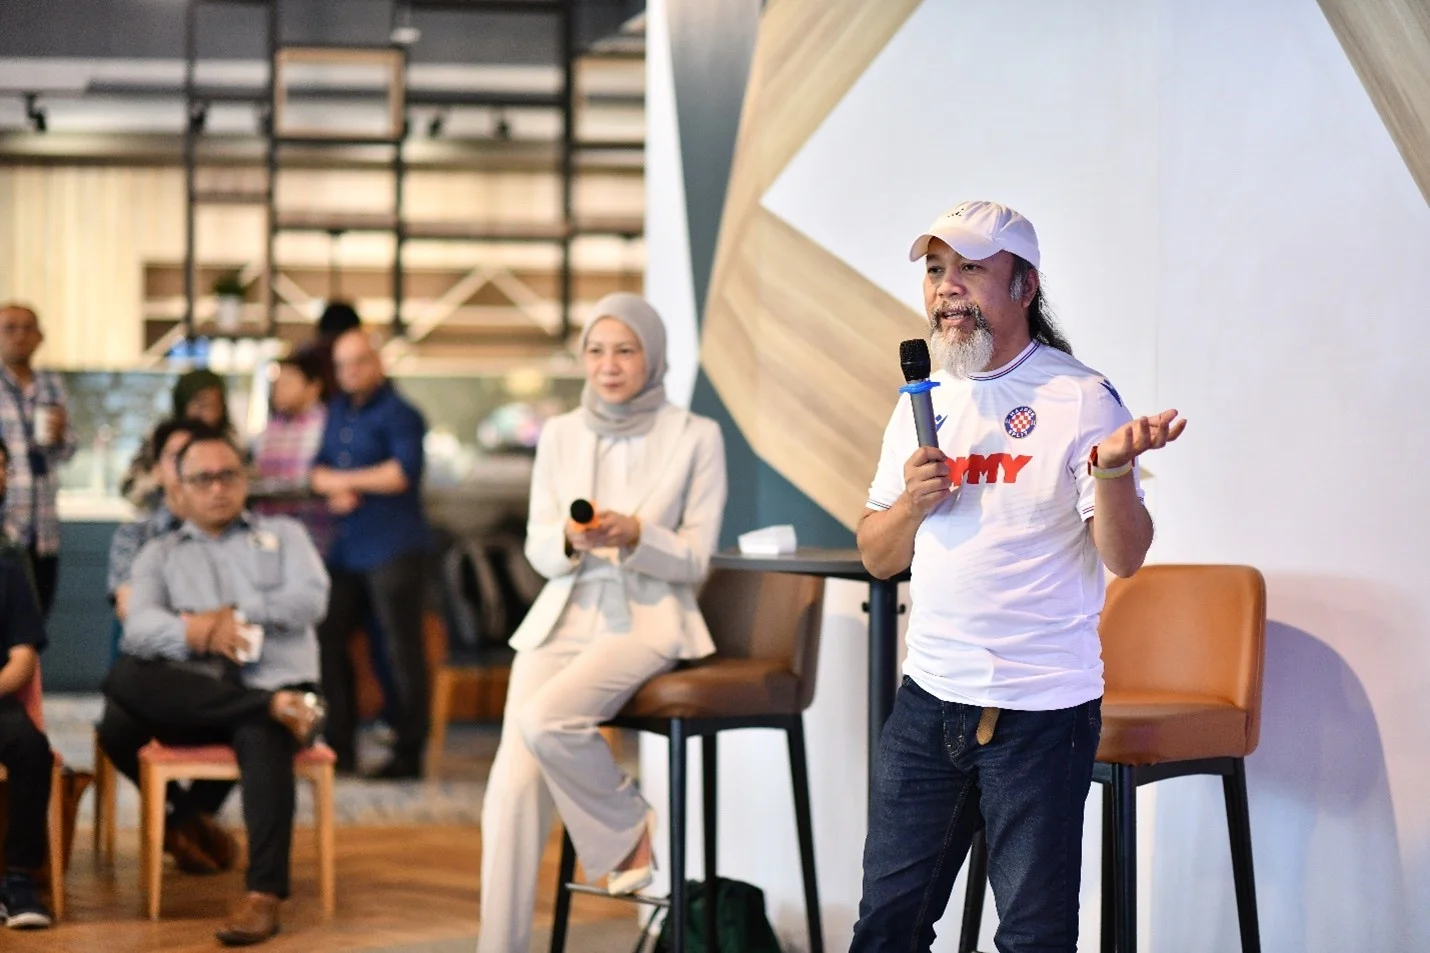 CEO & CO-Founder of PitchIN, Sam Shafie introduced PitchIN alongside MAVCAP’s COO, Noor Amy Ismail